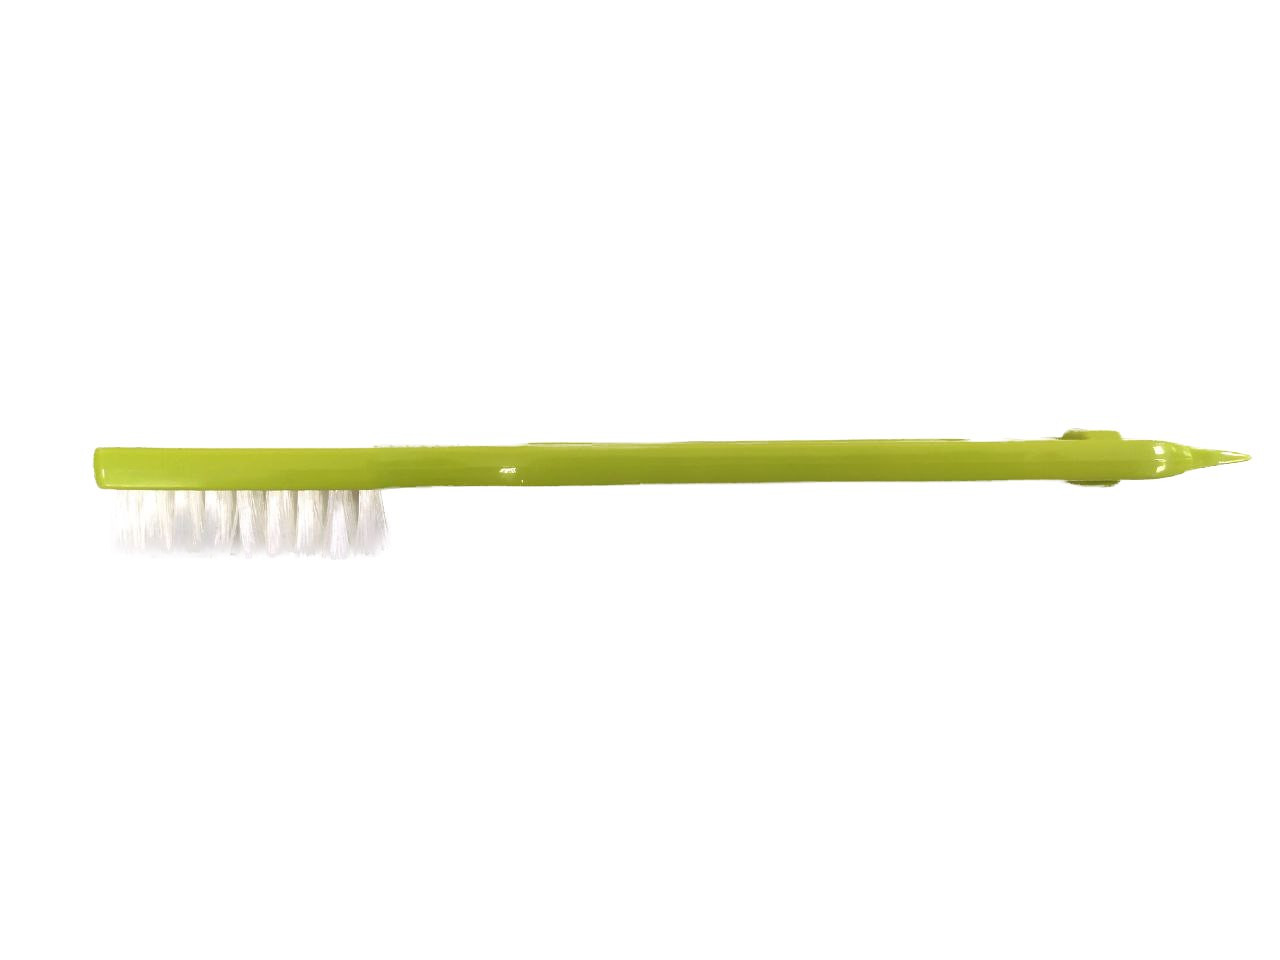 https://www.nutrimedium.com/2287/spare-part-omega-juicer-mm900-and-mm1500-cleaning-brush.jpg